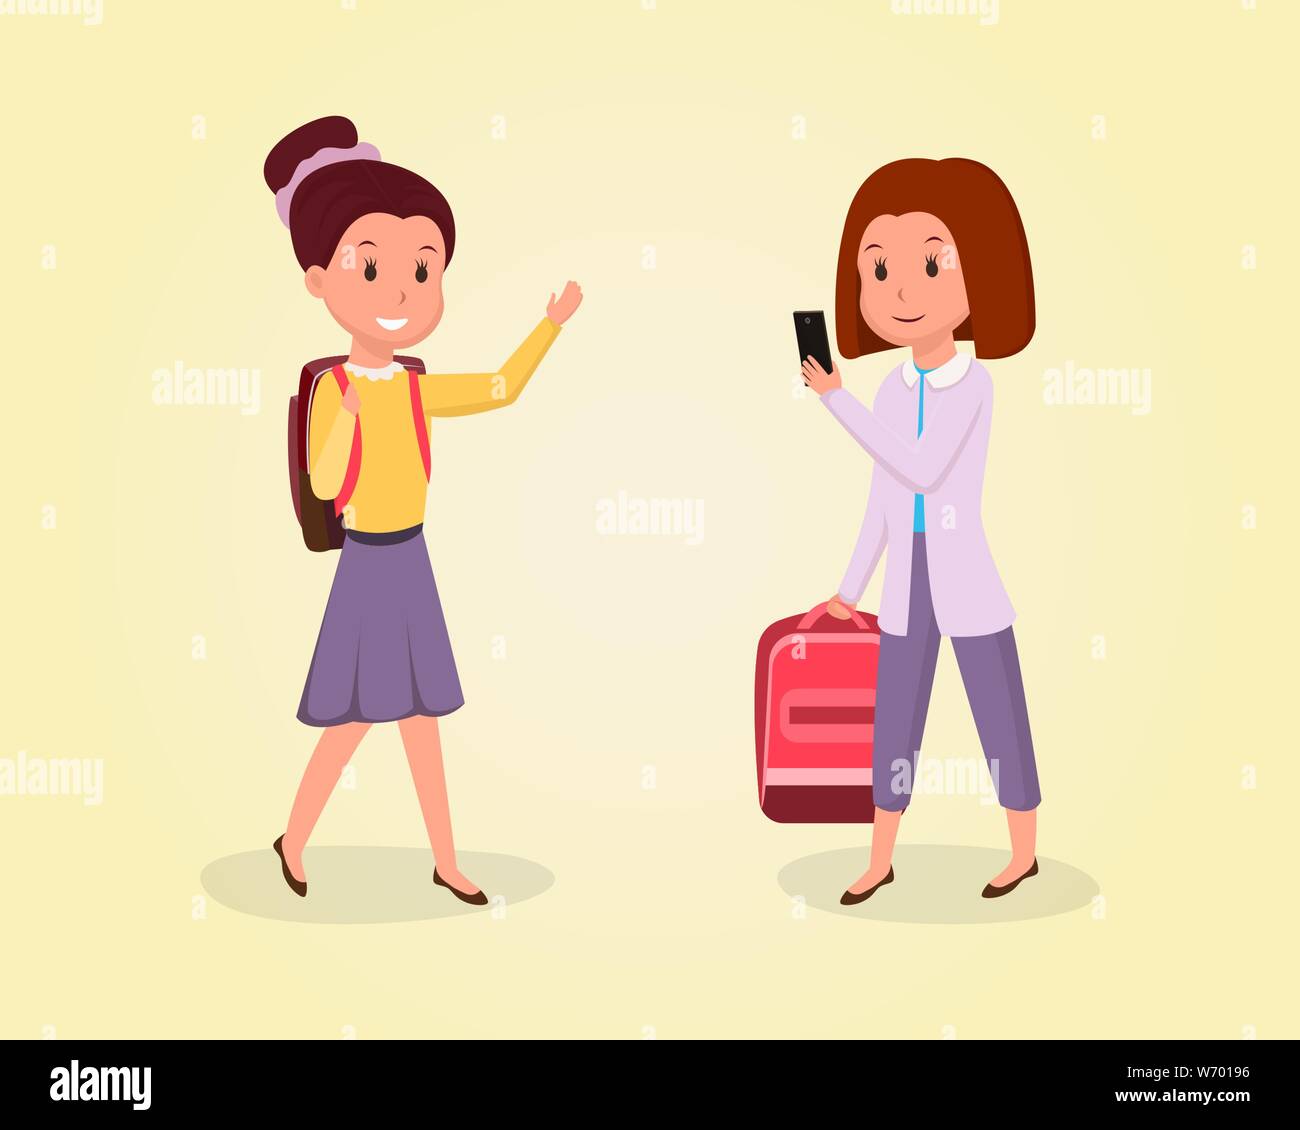 Schoolgirl going to school flat illustration. Schoolchild with backpack waving hand, pupil holding rucksack and using smartphone cartoon characters set. Classmates, girlfriends isolated clipart Stock Vector